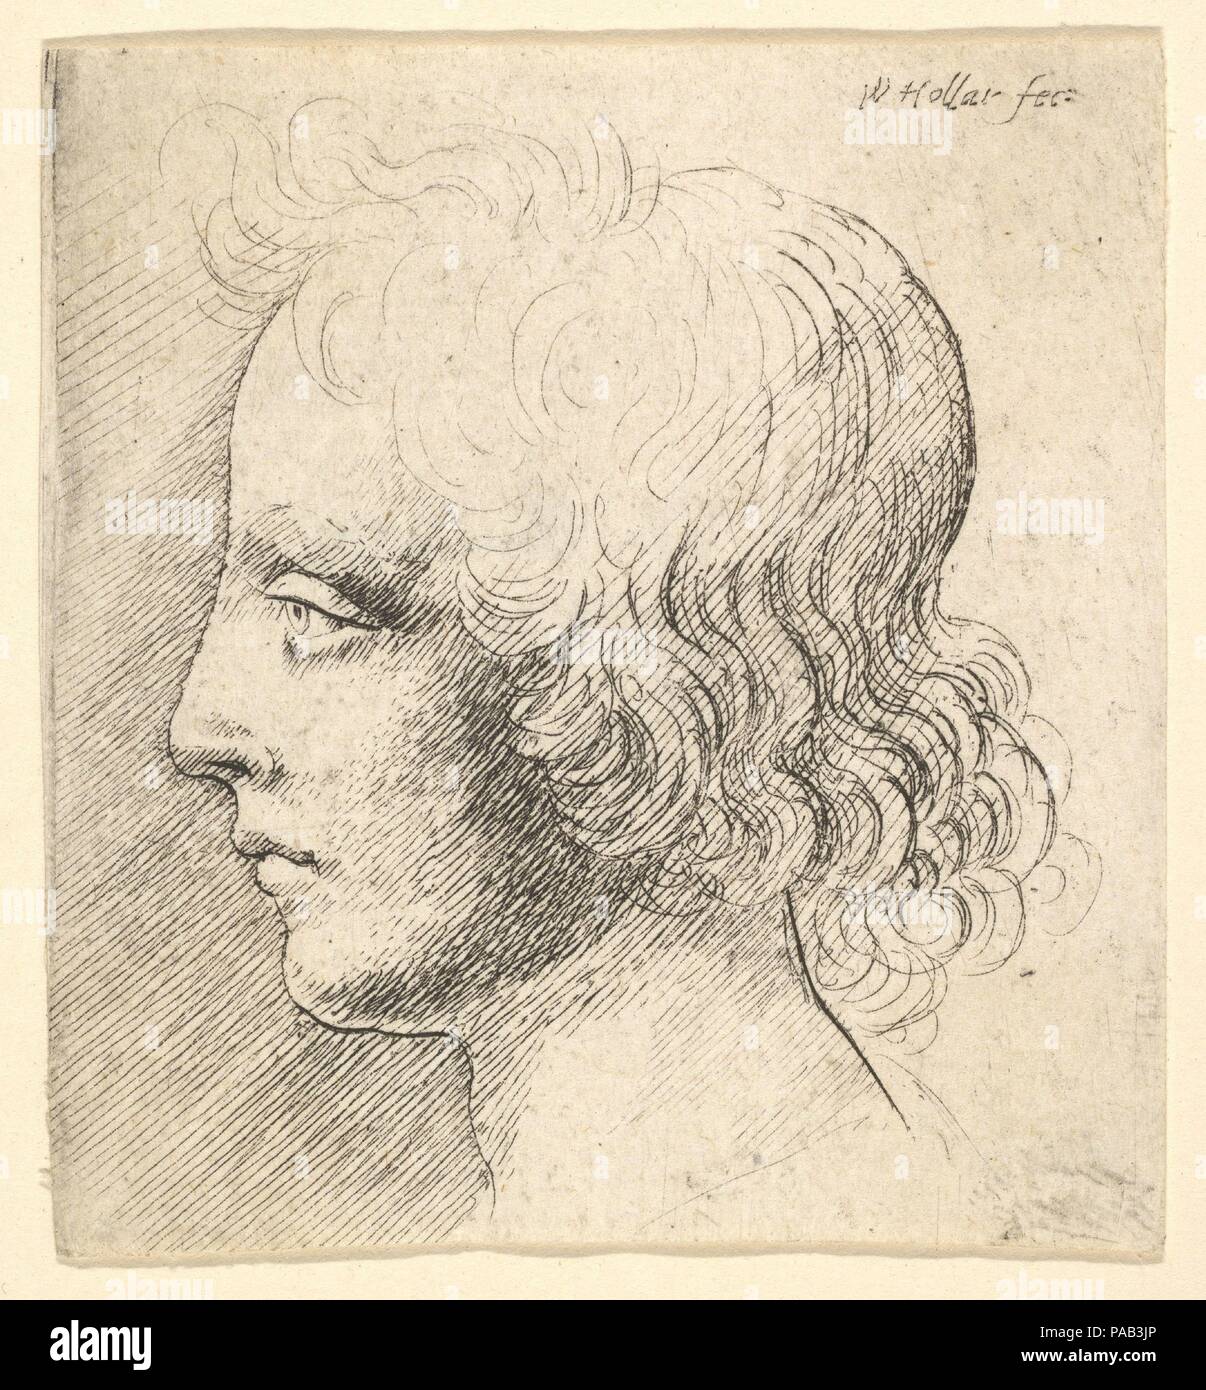 Head of Young Man. Artist: Wenceslaus Hollar (Bohemian, Prague 1607-1677 London). Dimensions: Sheet: 2 1/4 × 2 1/8 in. (5.7 × 5.4 cm)  right hand side of cut plate and cut within platemark on other sides. Date: 1625-77.  Head of a youth with curly hair falling over the nape of his neck, in profile to left; after Leonardo da Vinci; second state, right side of cut plate. Museum: Metropolitan Museum of Art, New York, USA. Stock Photo